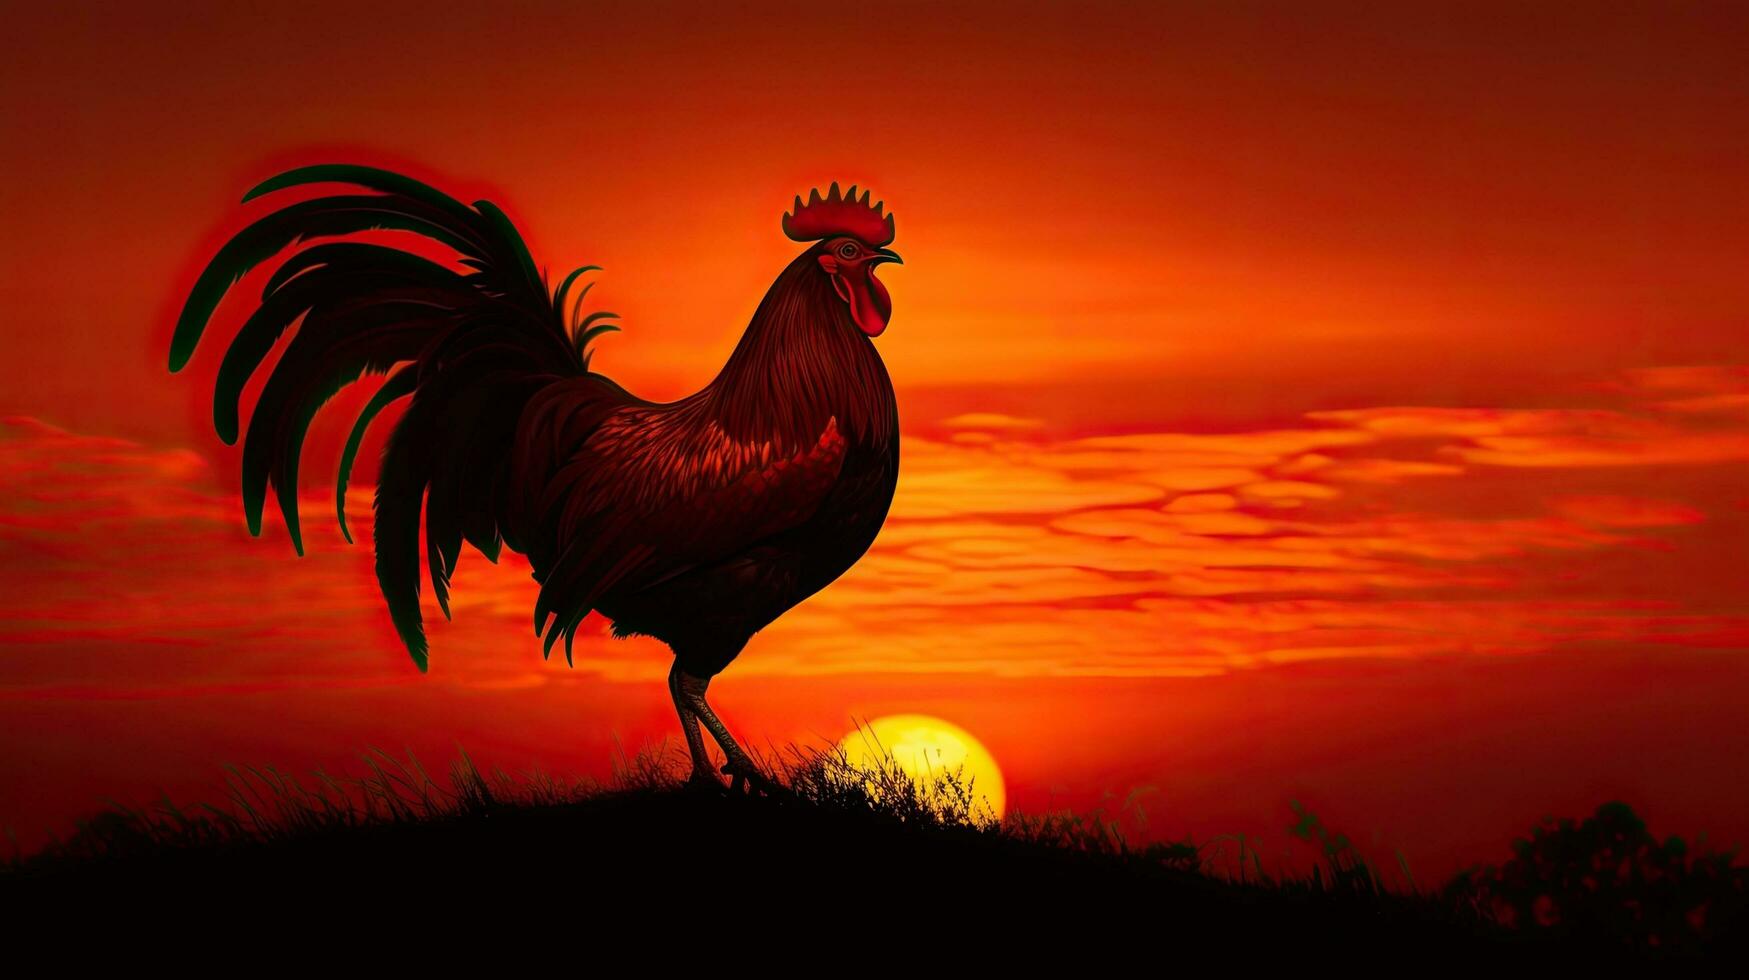 Morning sunrise casts rooster shadow photo